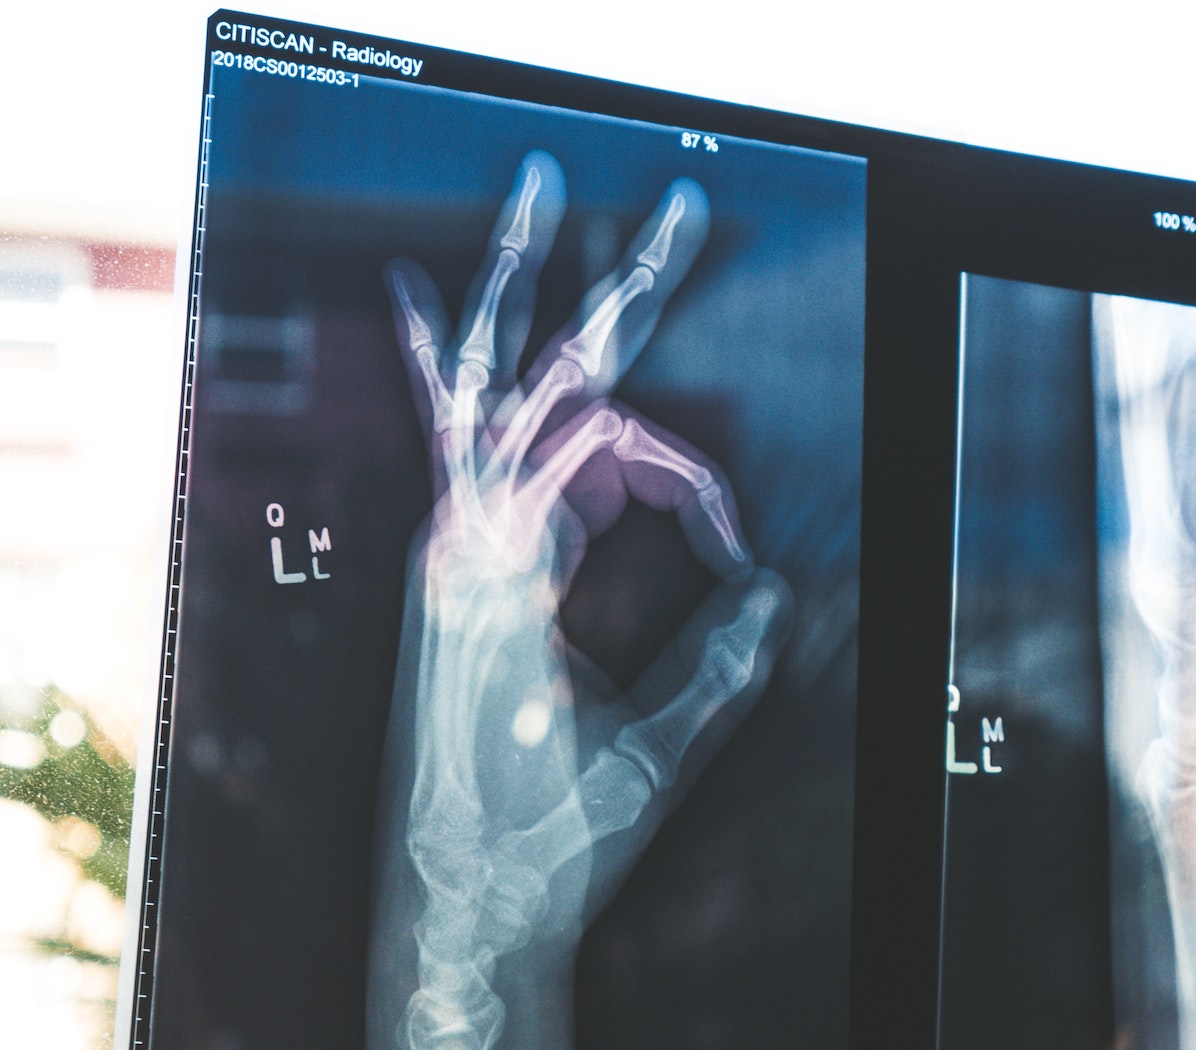 OK hand x-ray good patient reviews